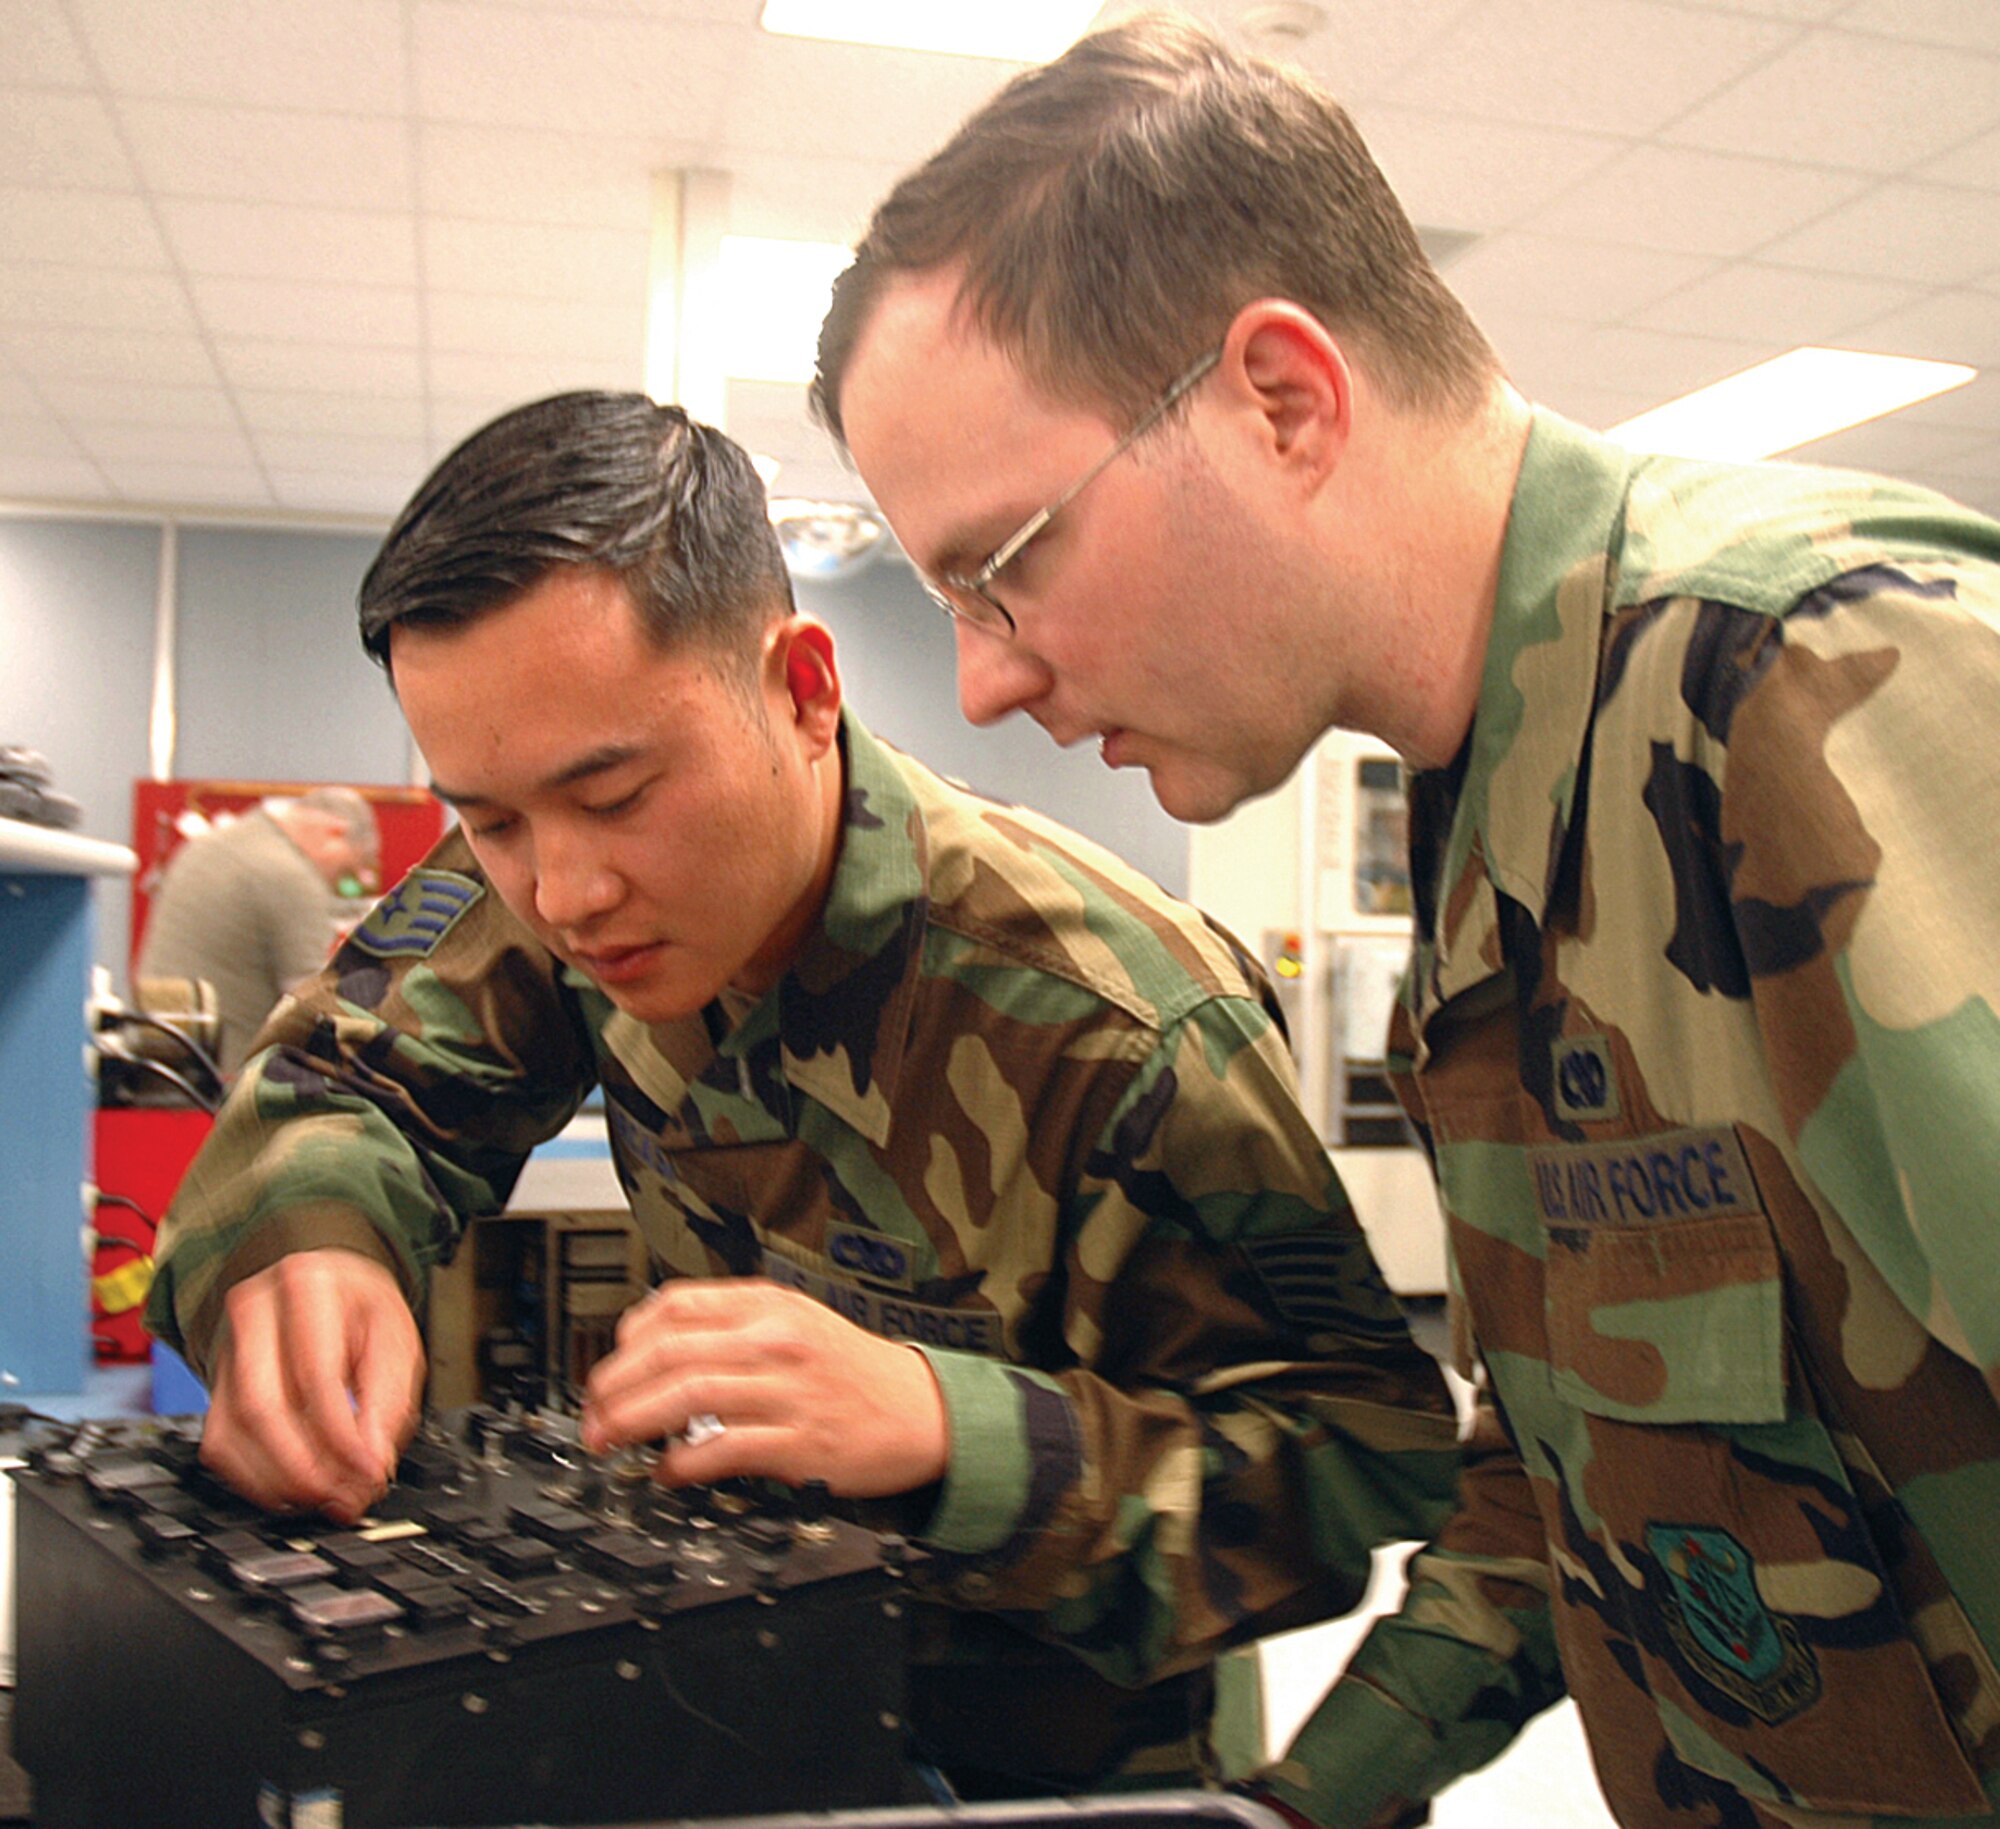 Staff Sgt. Christopher Parcasio, left, shows Senior Airman Buell Richardson how to repair a fuel-system, engine-start control panel. Both reservists are assigned to the 446th Maintenance Squadron, McChord Air Force Base, Wash. (U.S. Air Force photo/Tech. Sgt. Jake Chappelle)